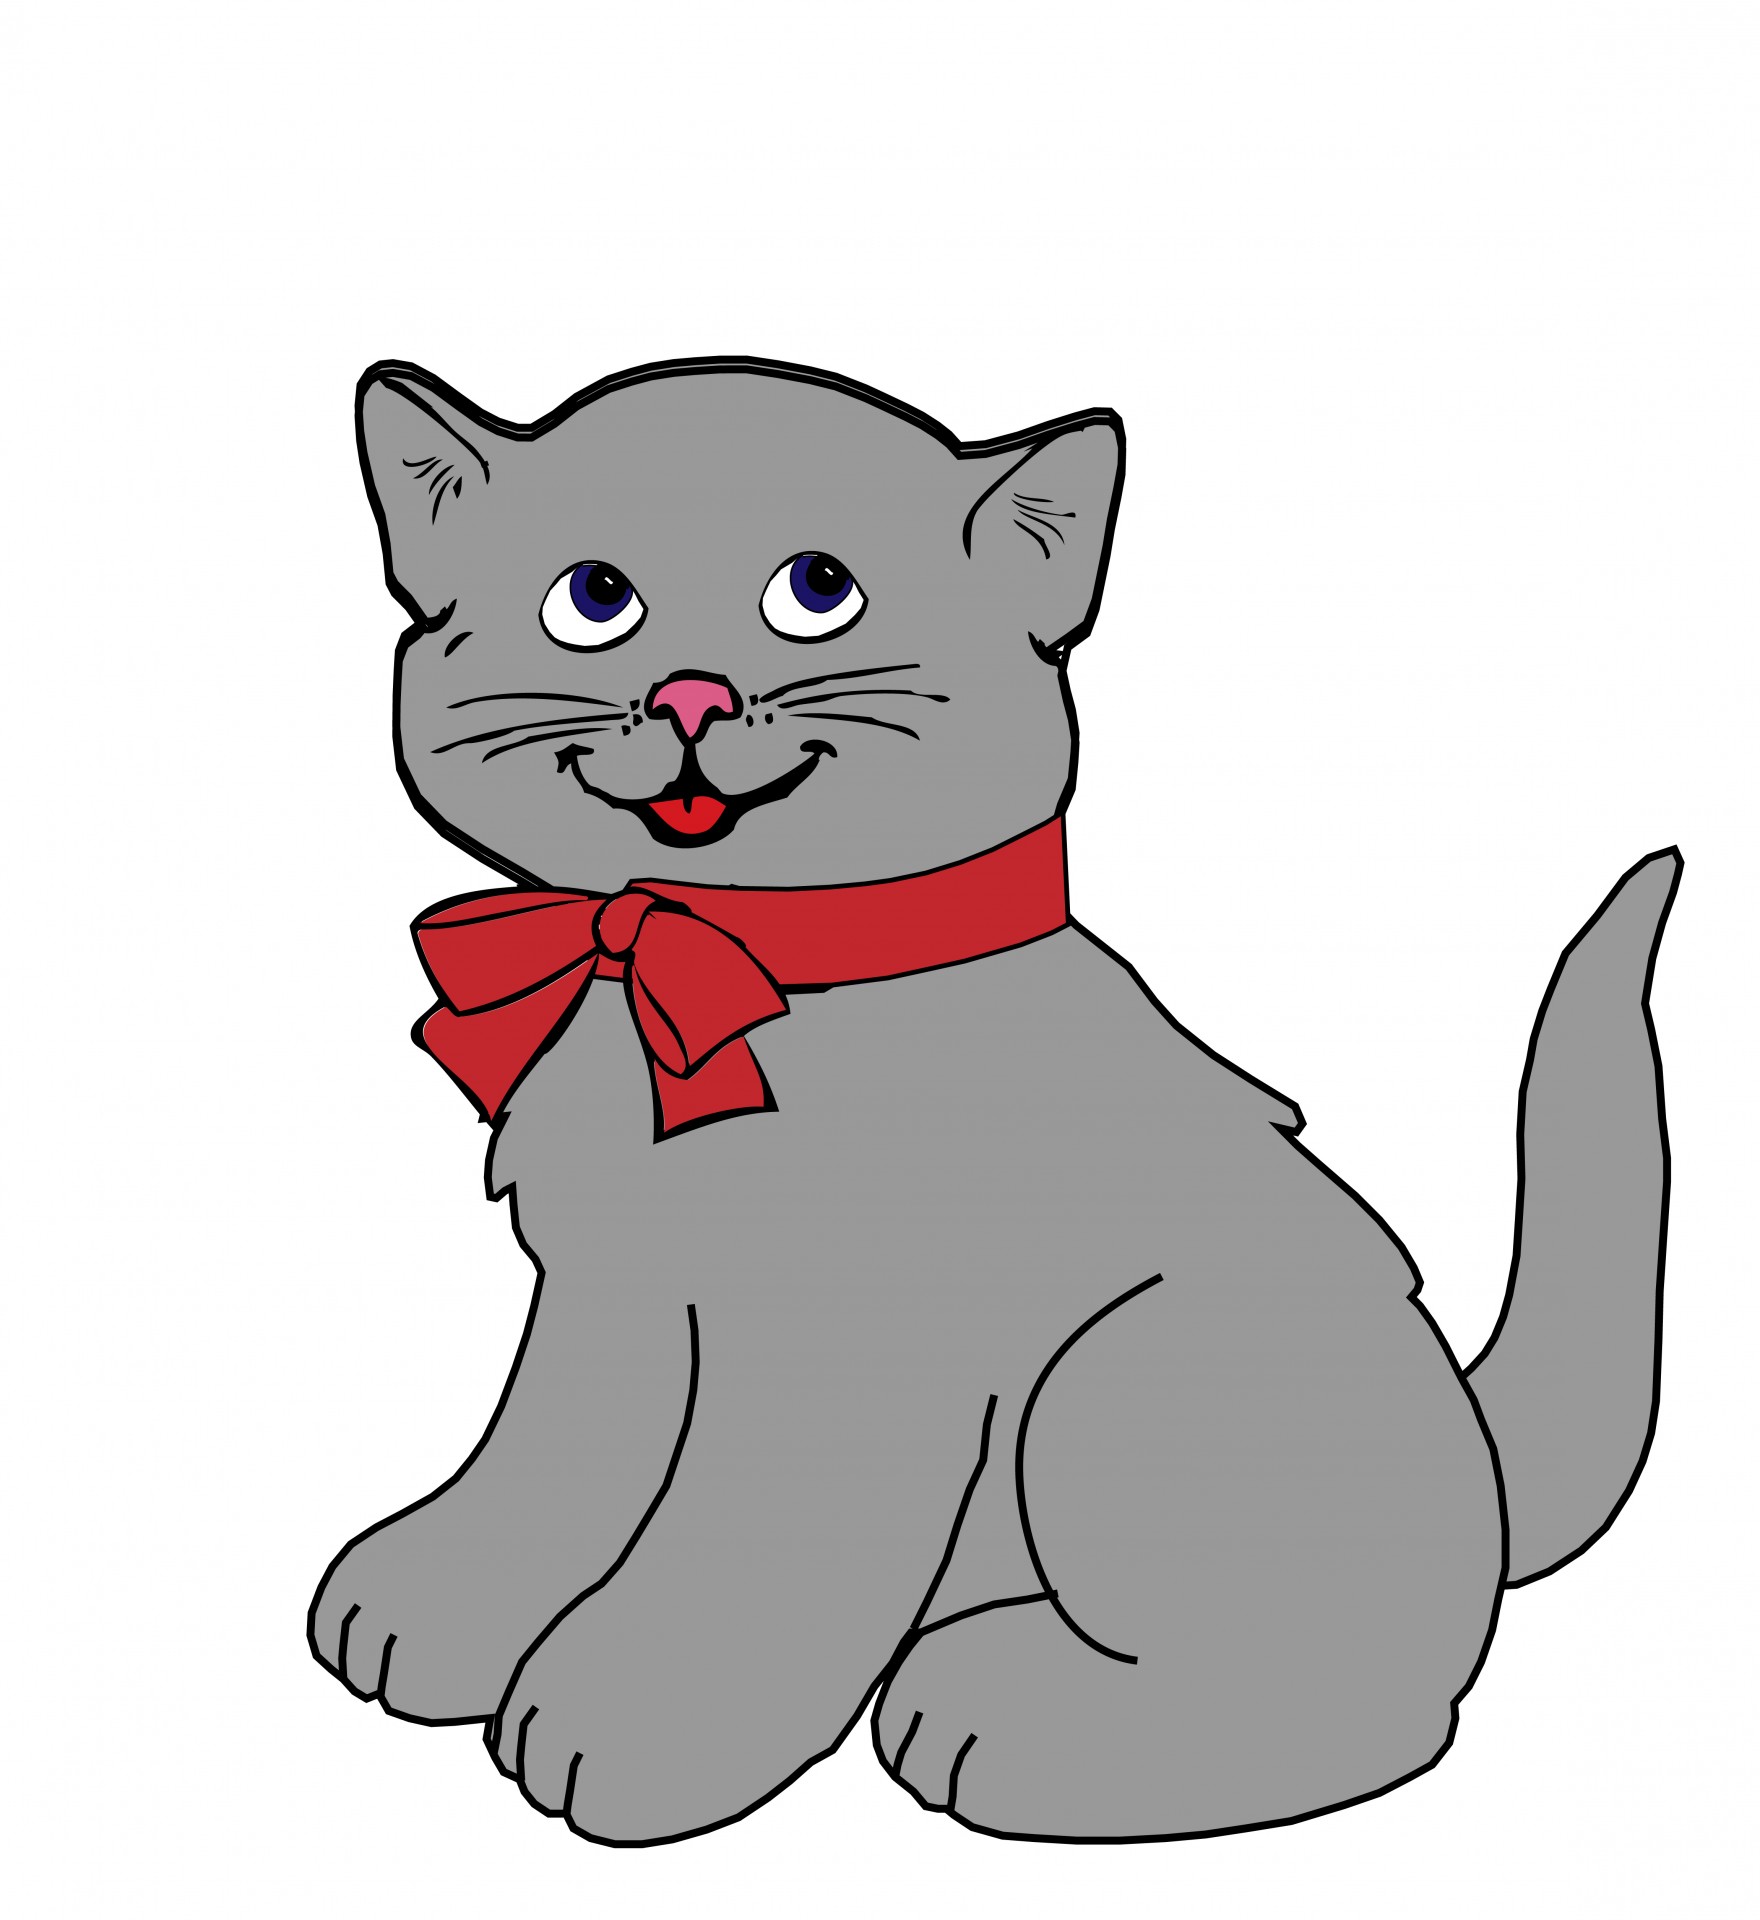 clipart image of a cat - photo #2